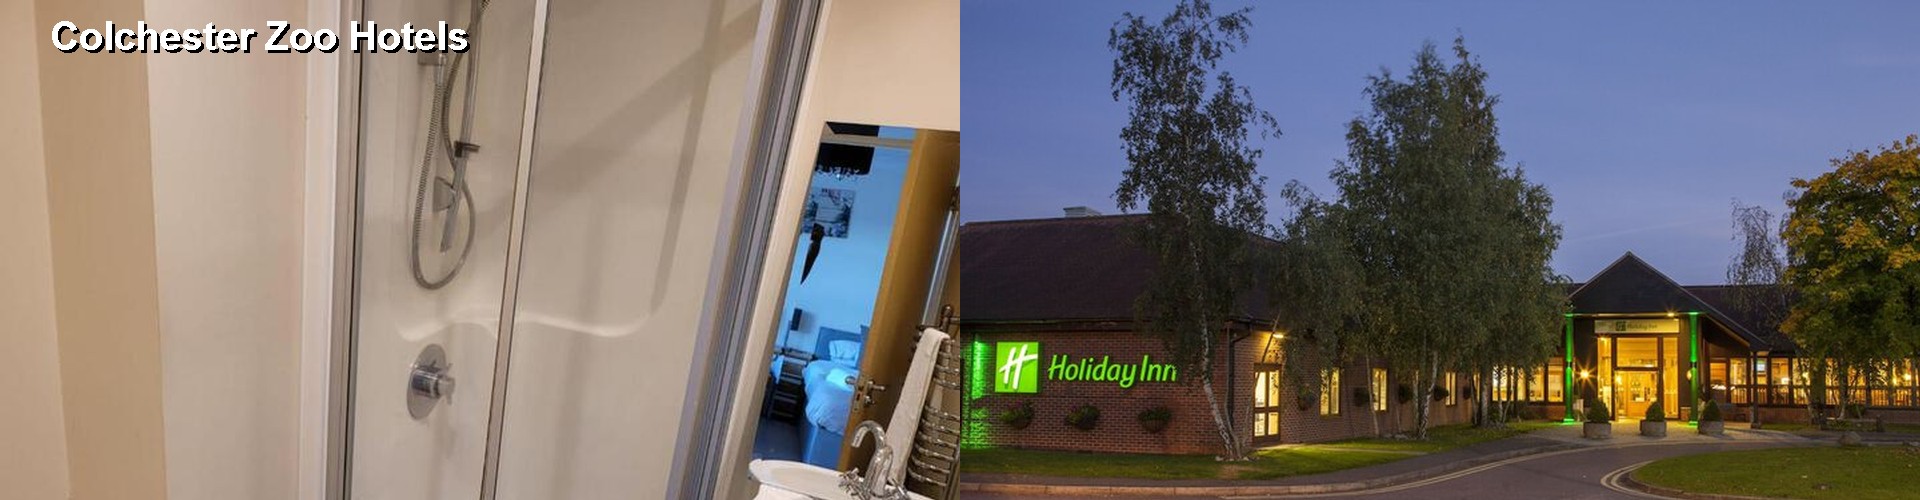 4 Best Hotels near Colchester Zoo